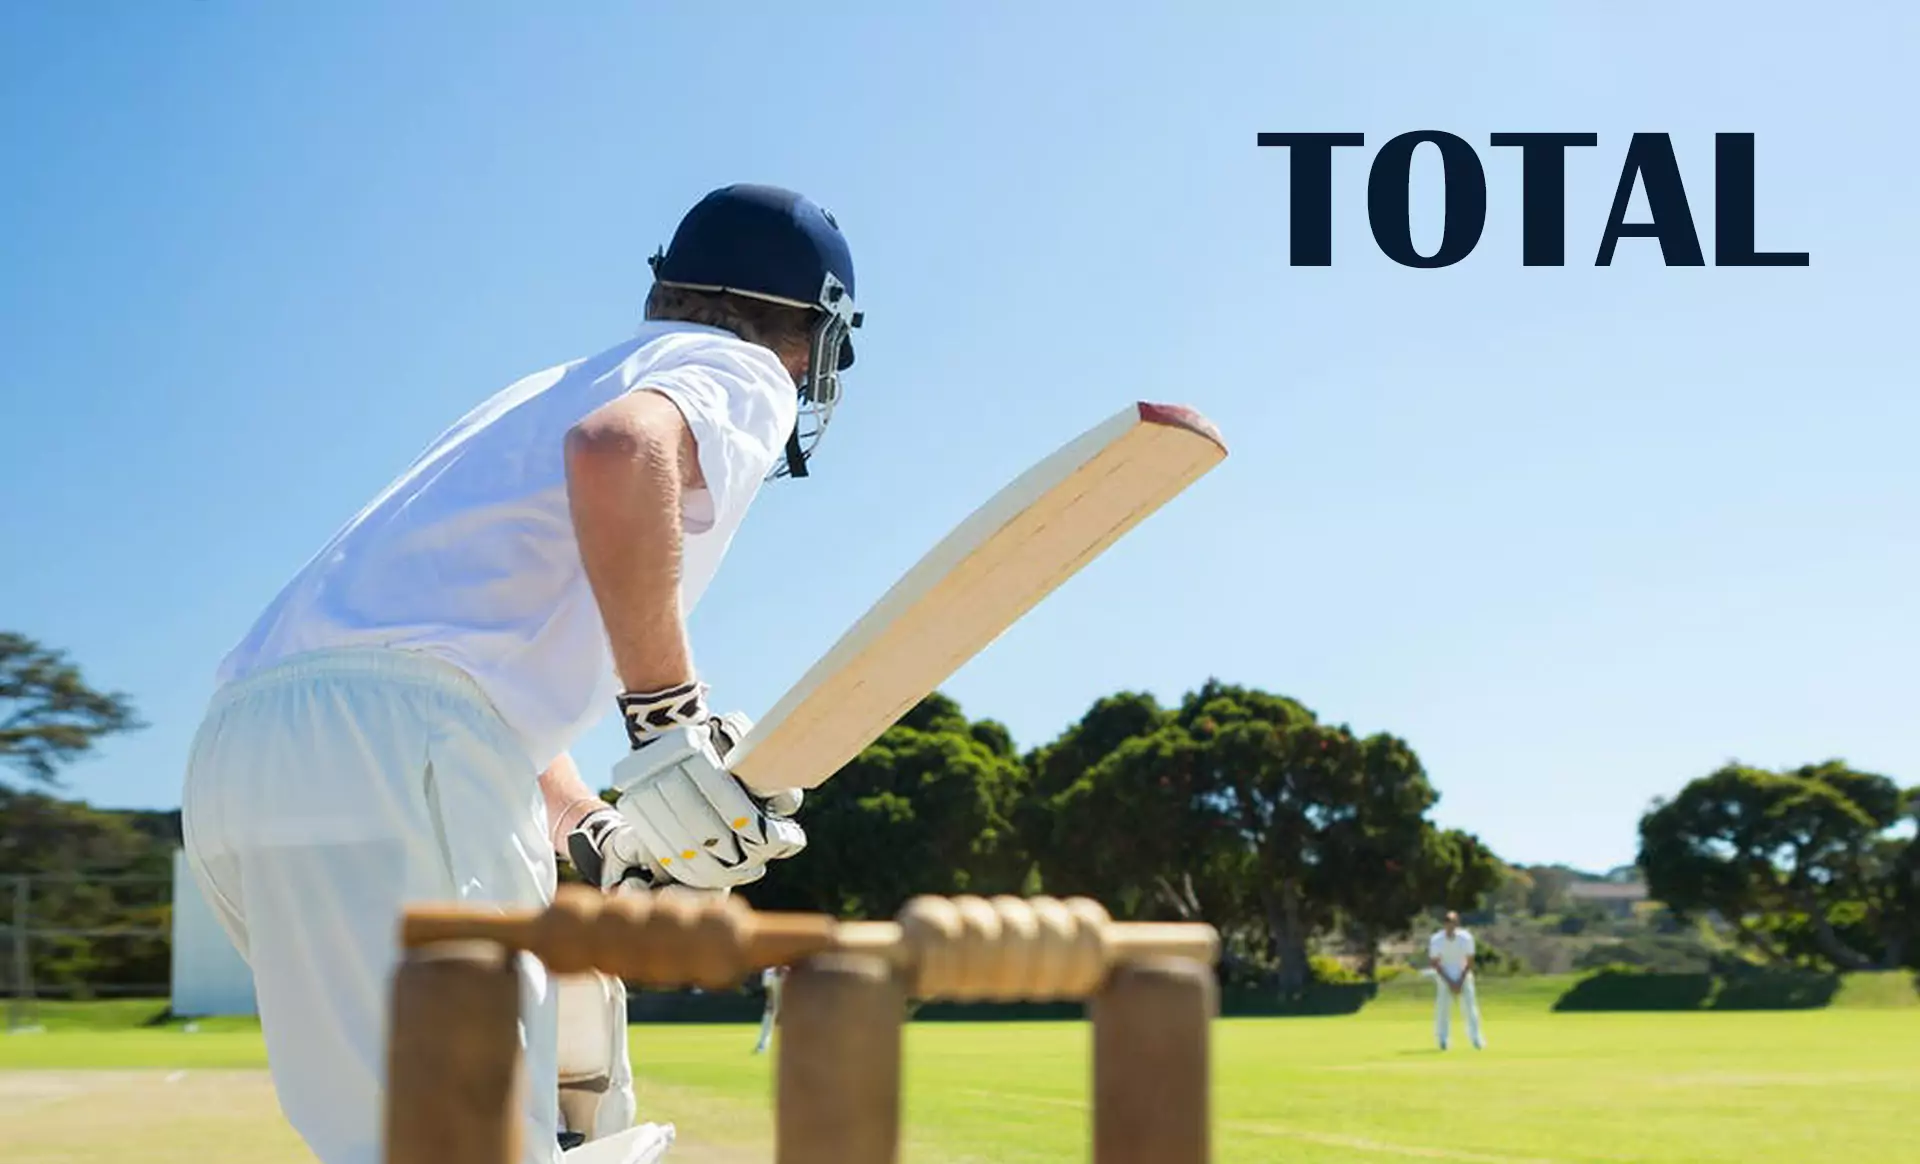 Betting on the total result of a cricket match is available for Indian users.